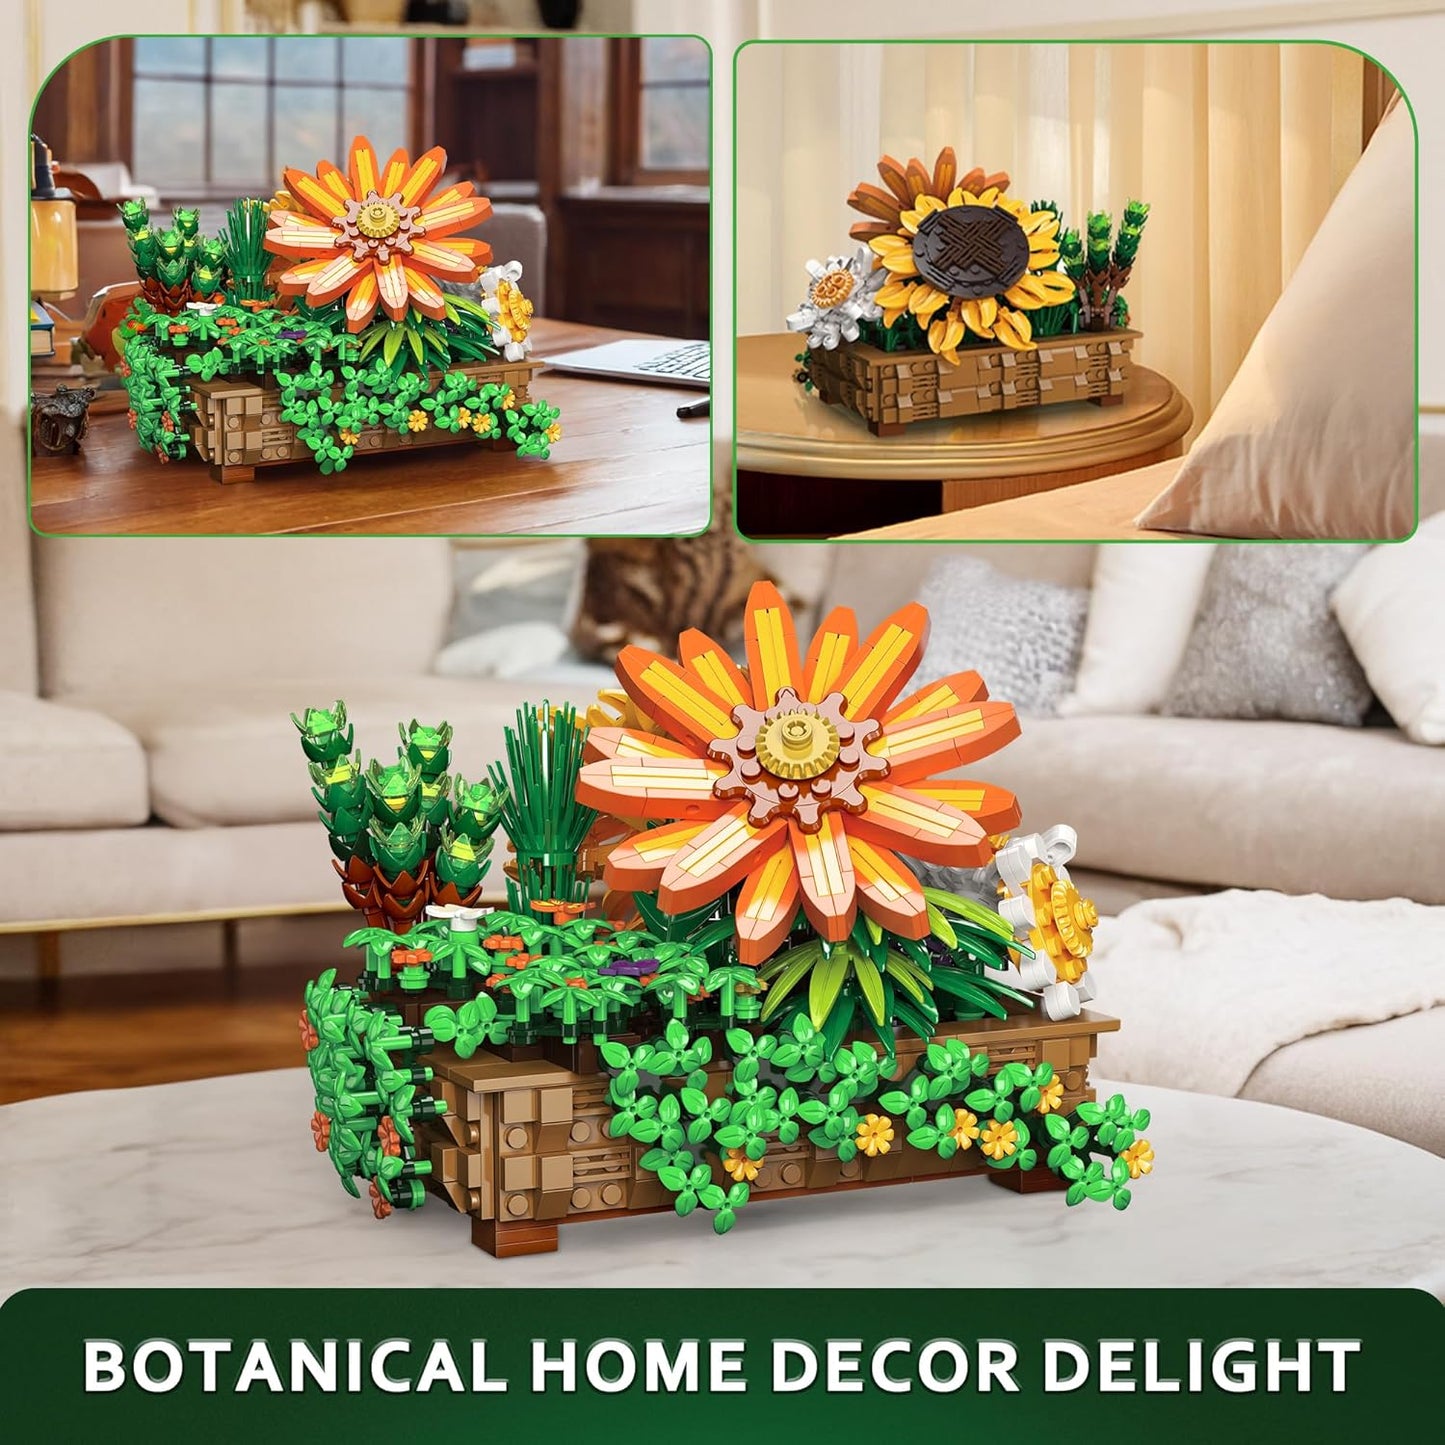 Under the Baubles Flower Botanical Bonsai Building Set - 924pcs, Home Decor, Mother's Day, Valentine's Day, Christmas for Adults and Kids, Climbing Ivy, Sunflower, Chrysanthemum.